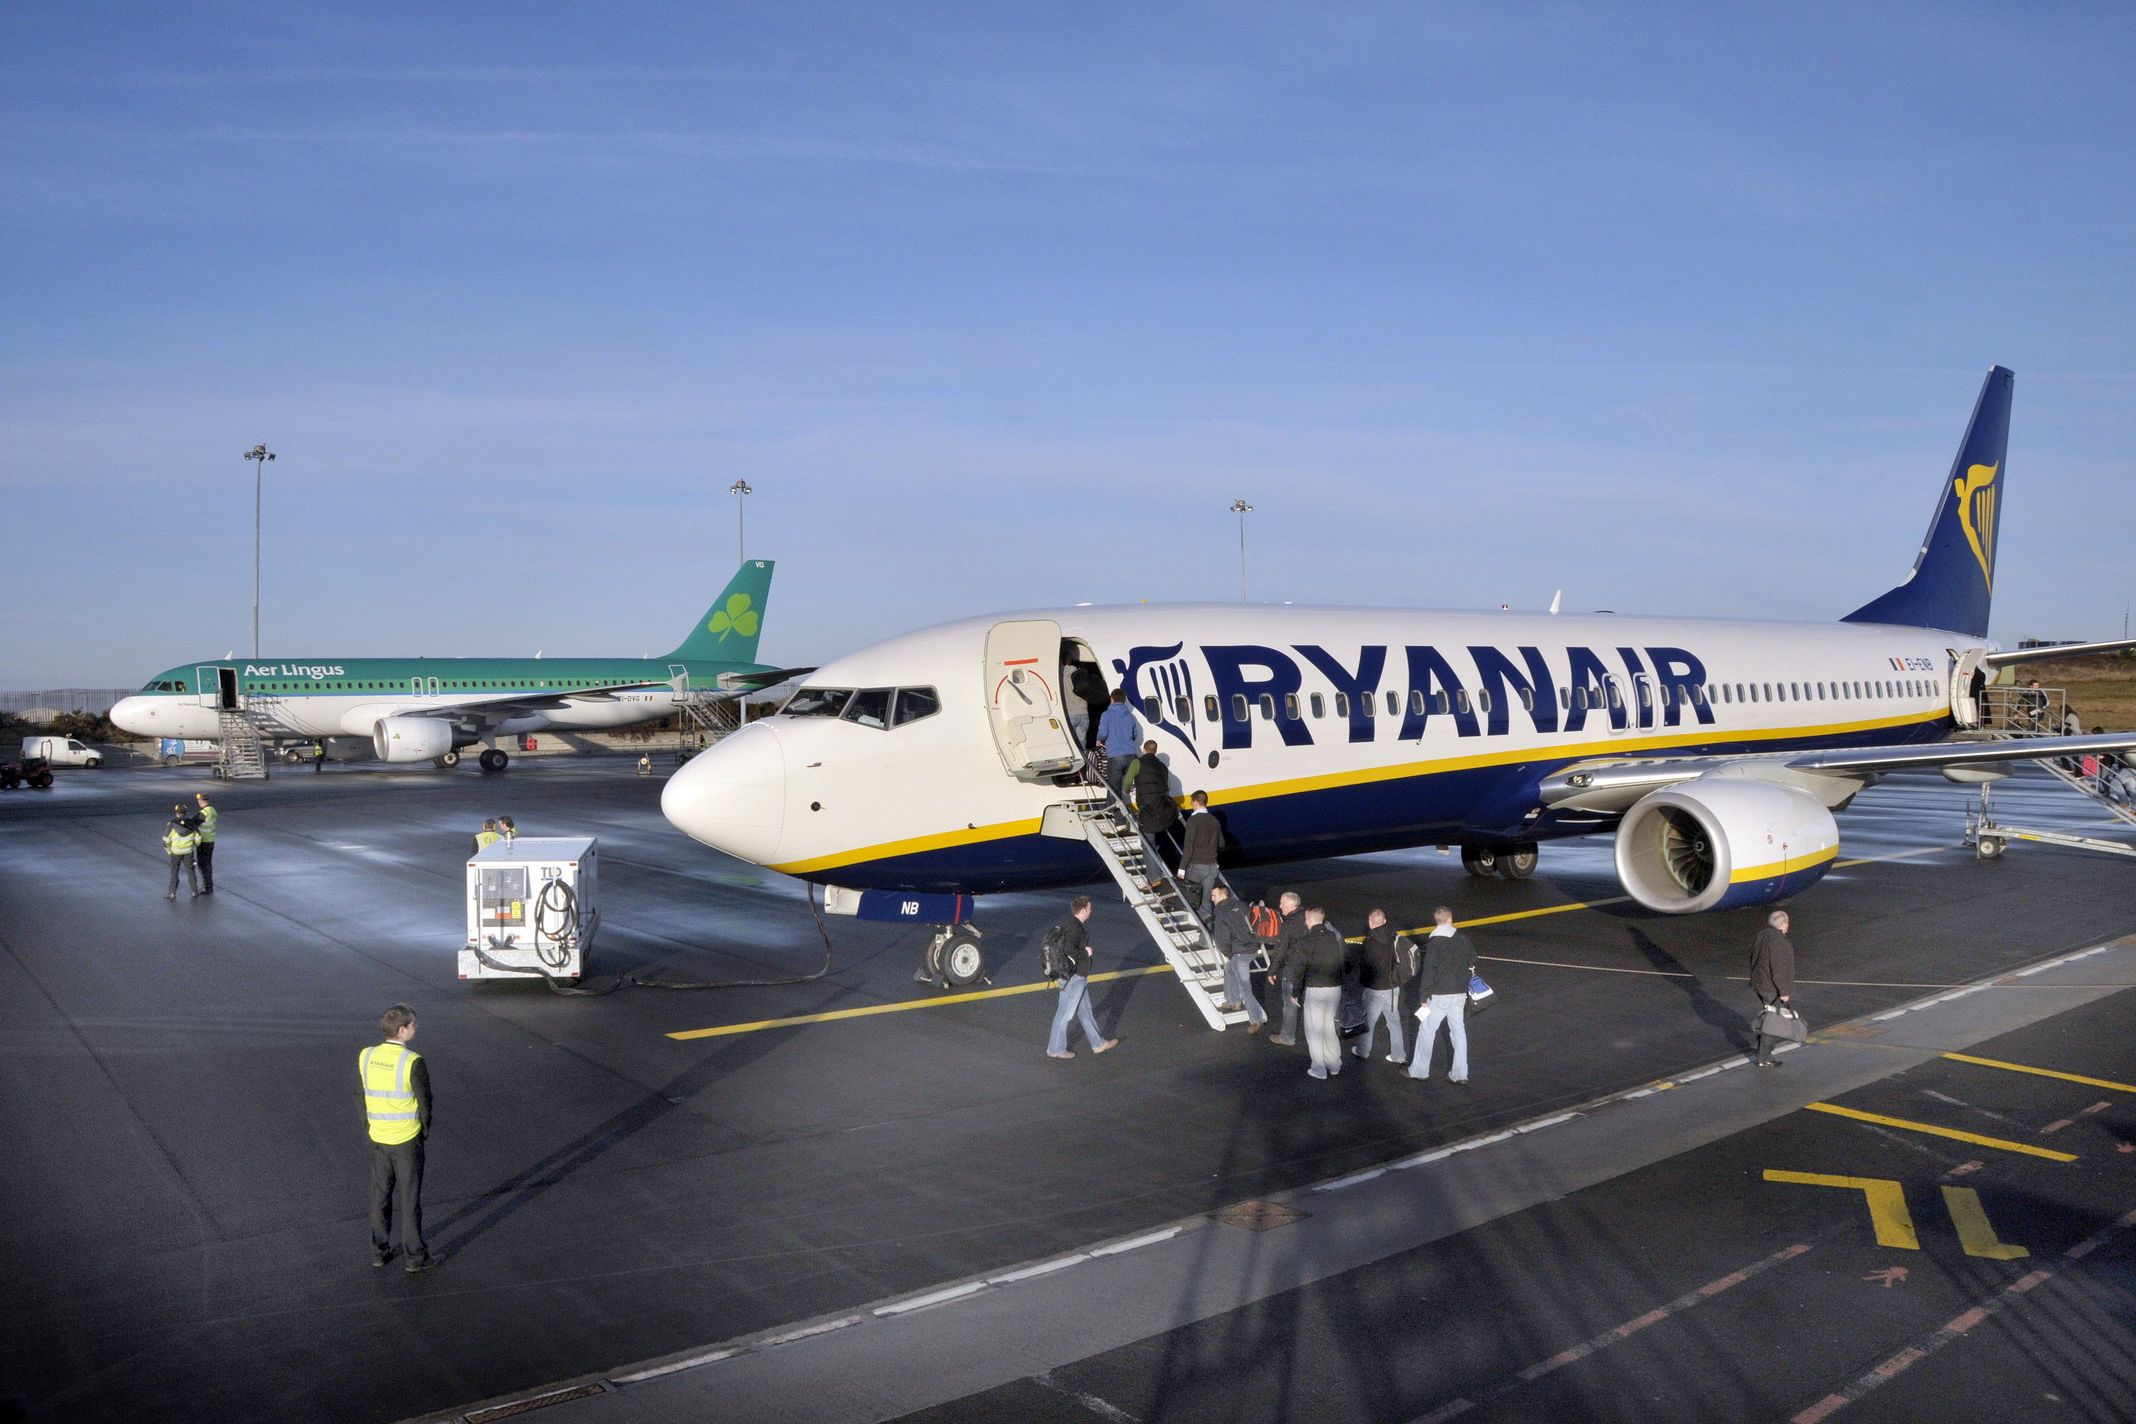 Ireland’s airports announce bumper winter schedules – but which is cheapest for mid-term parking?